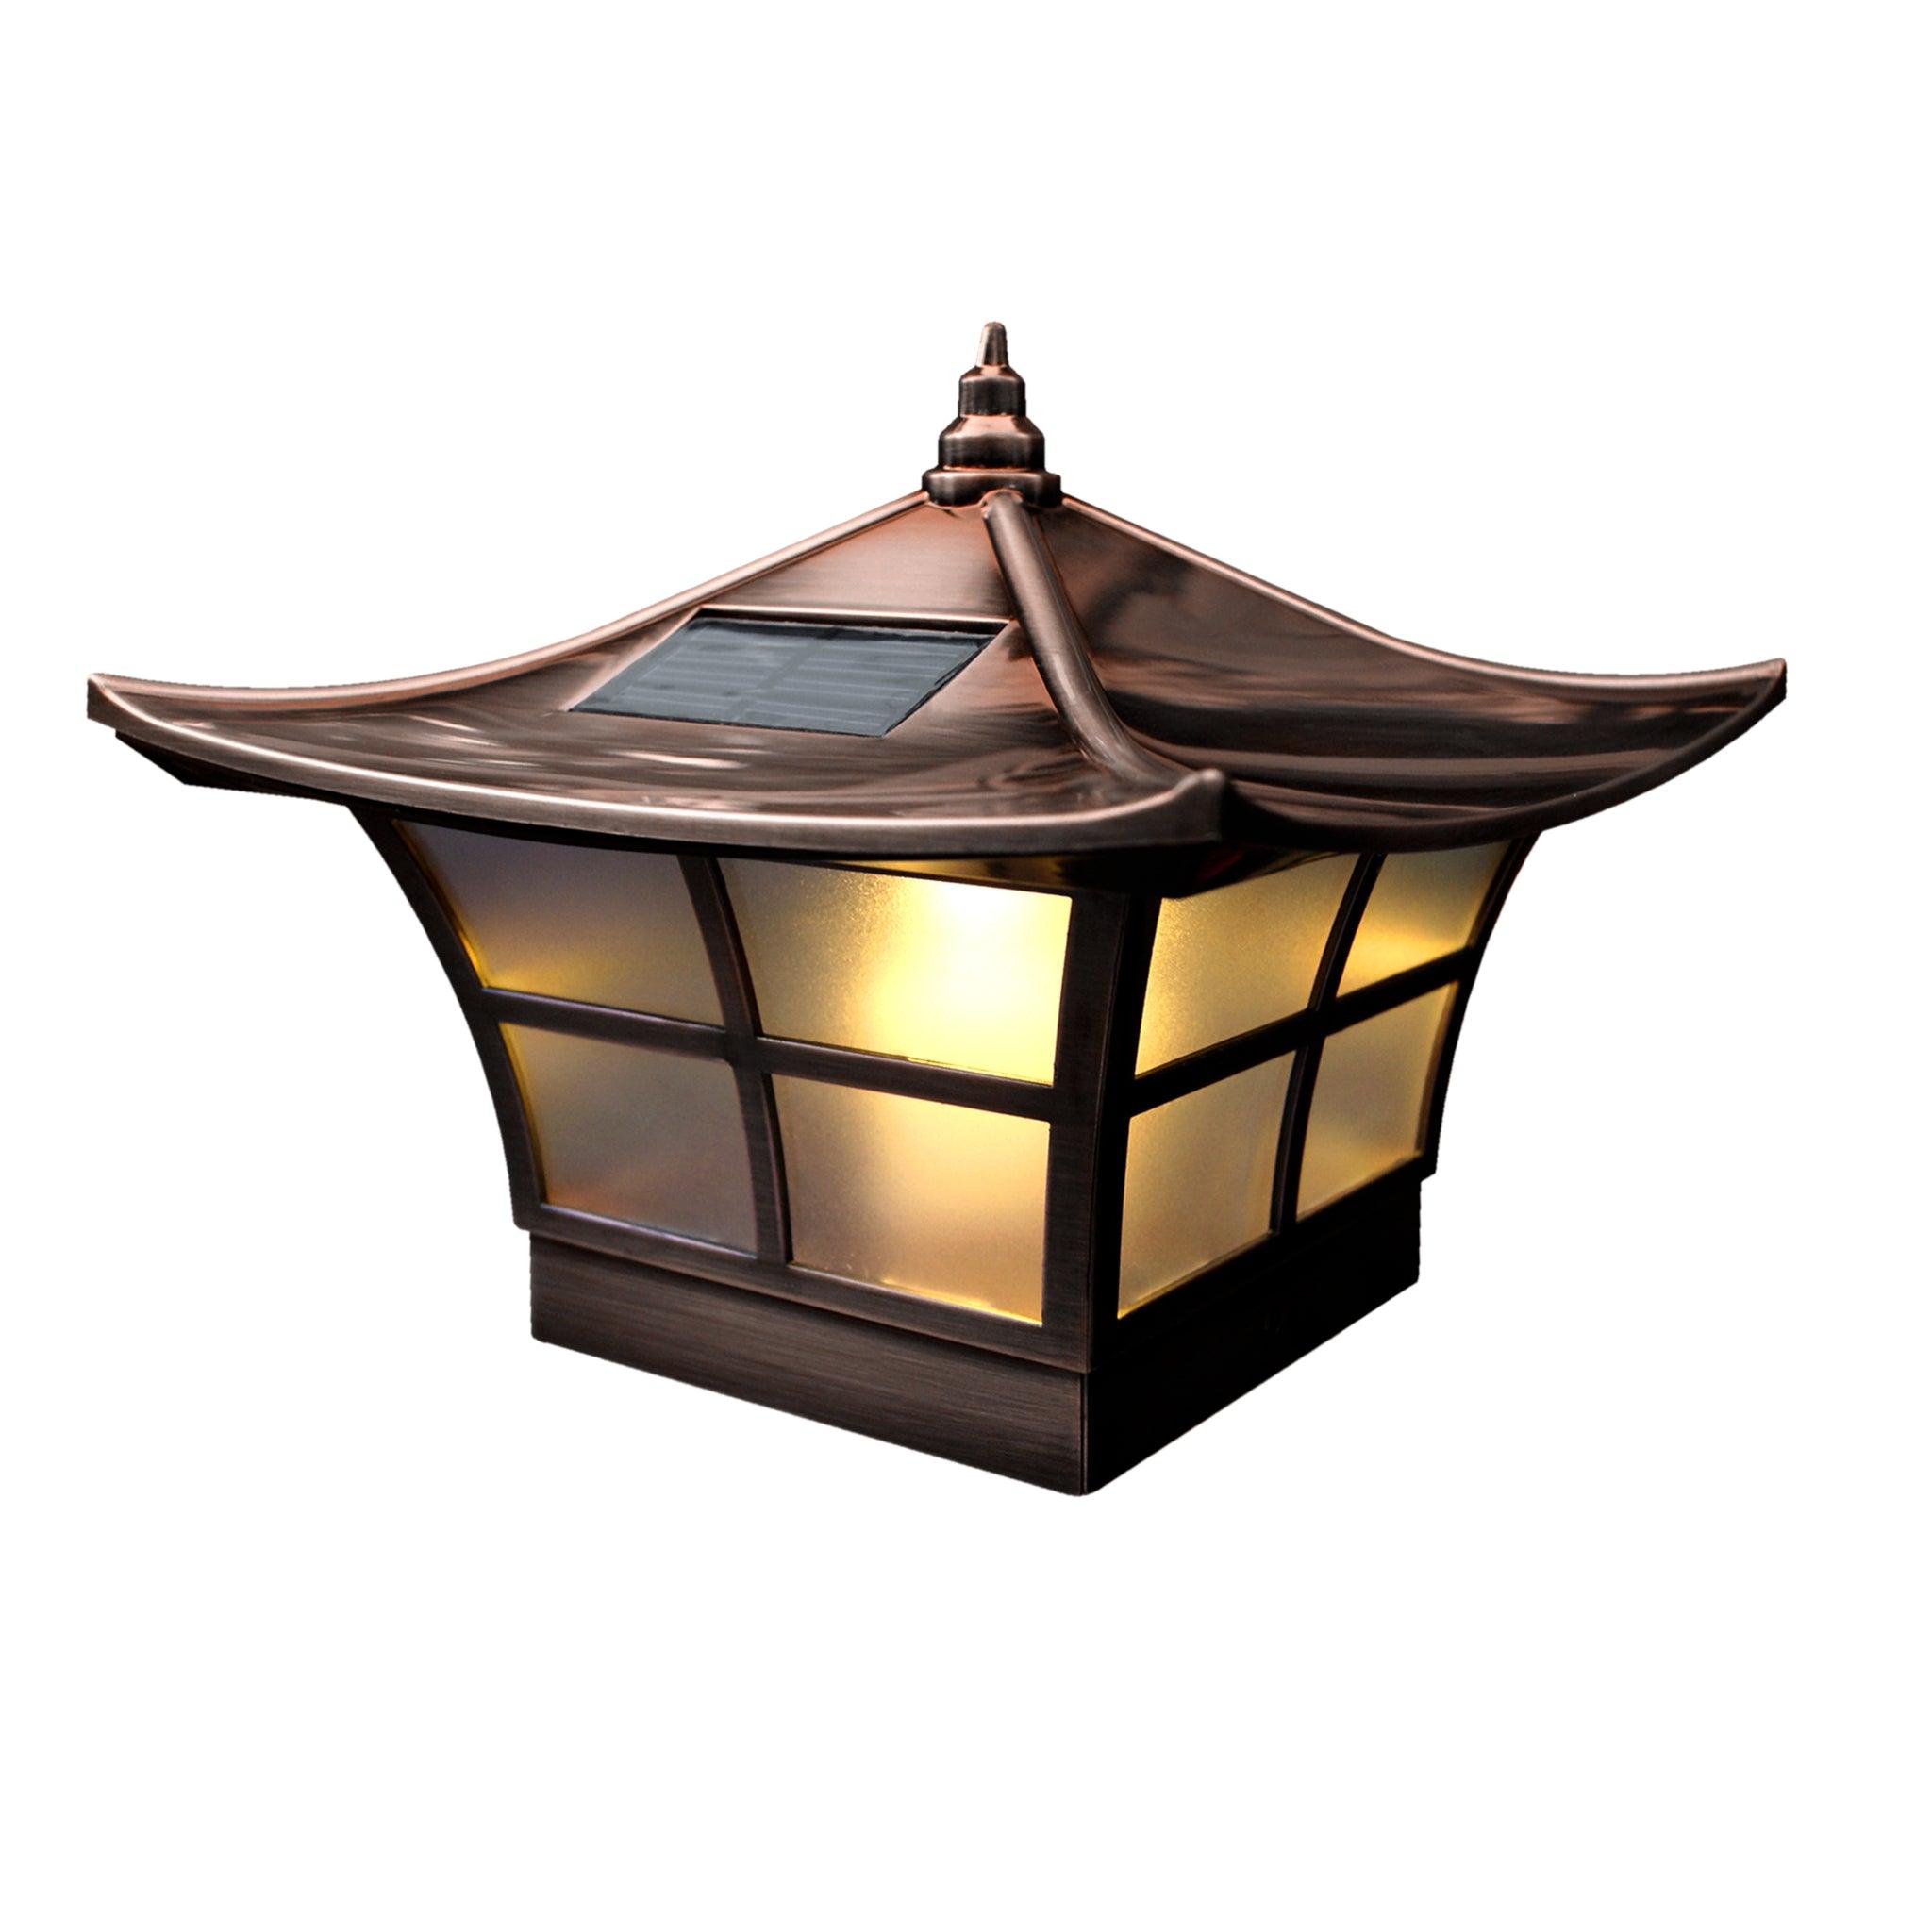 Ambience Solar Post Cap - Copper Electroplated